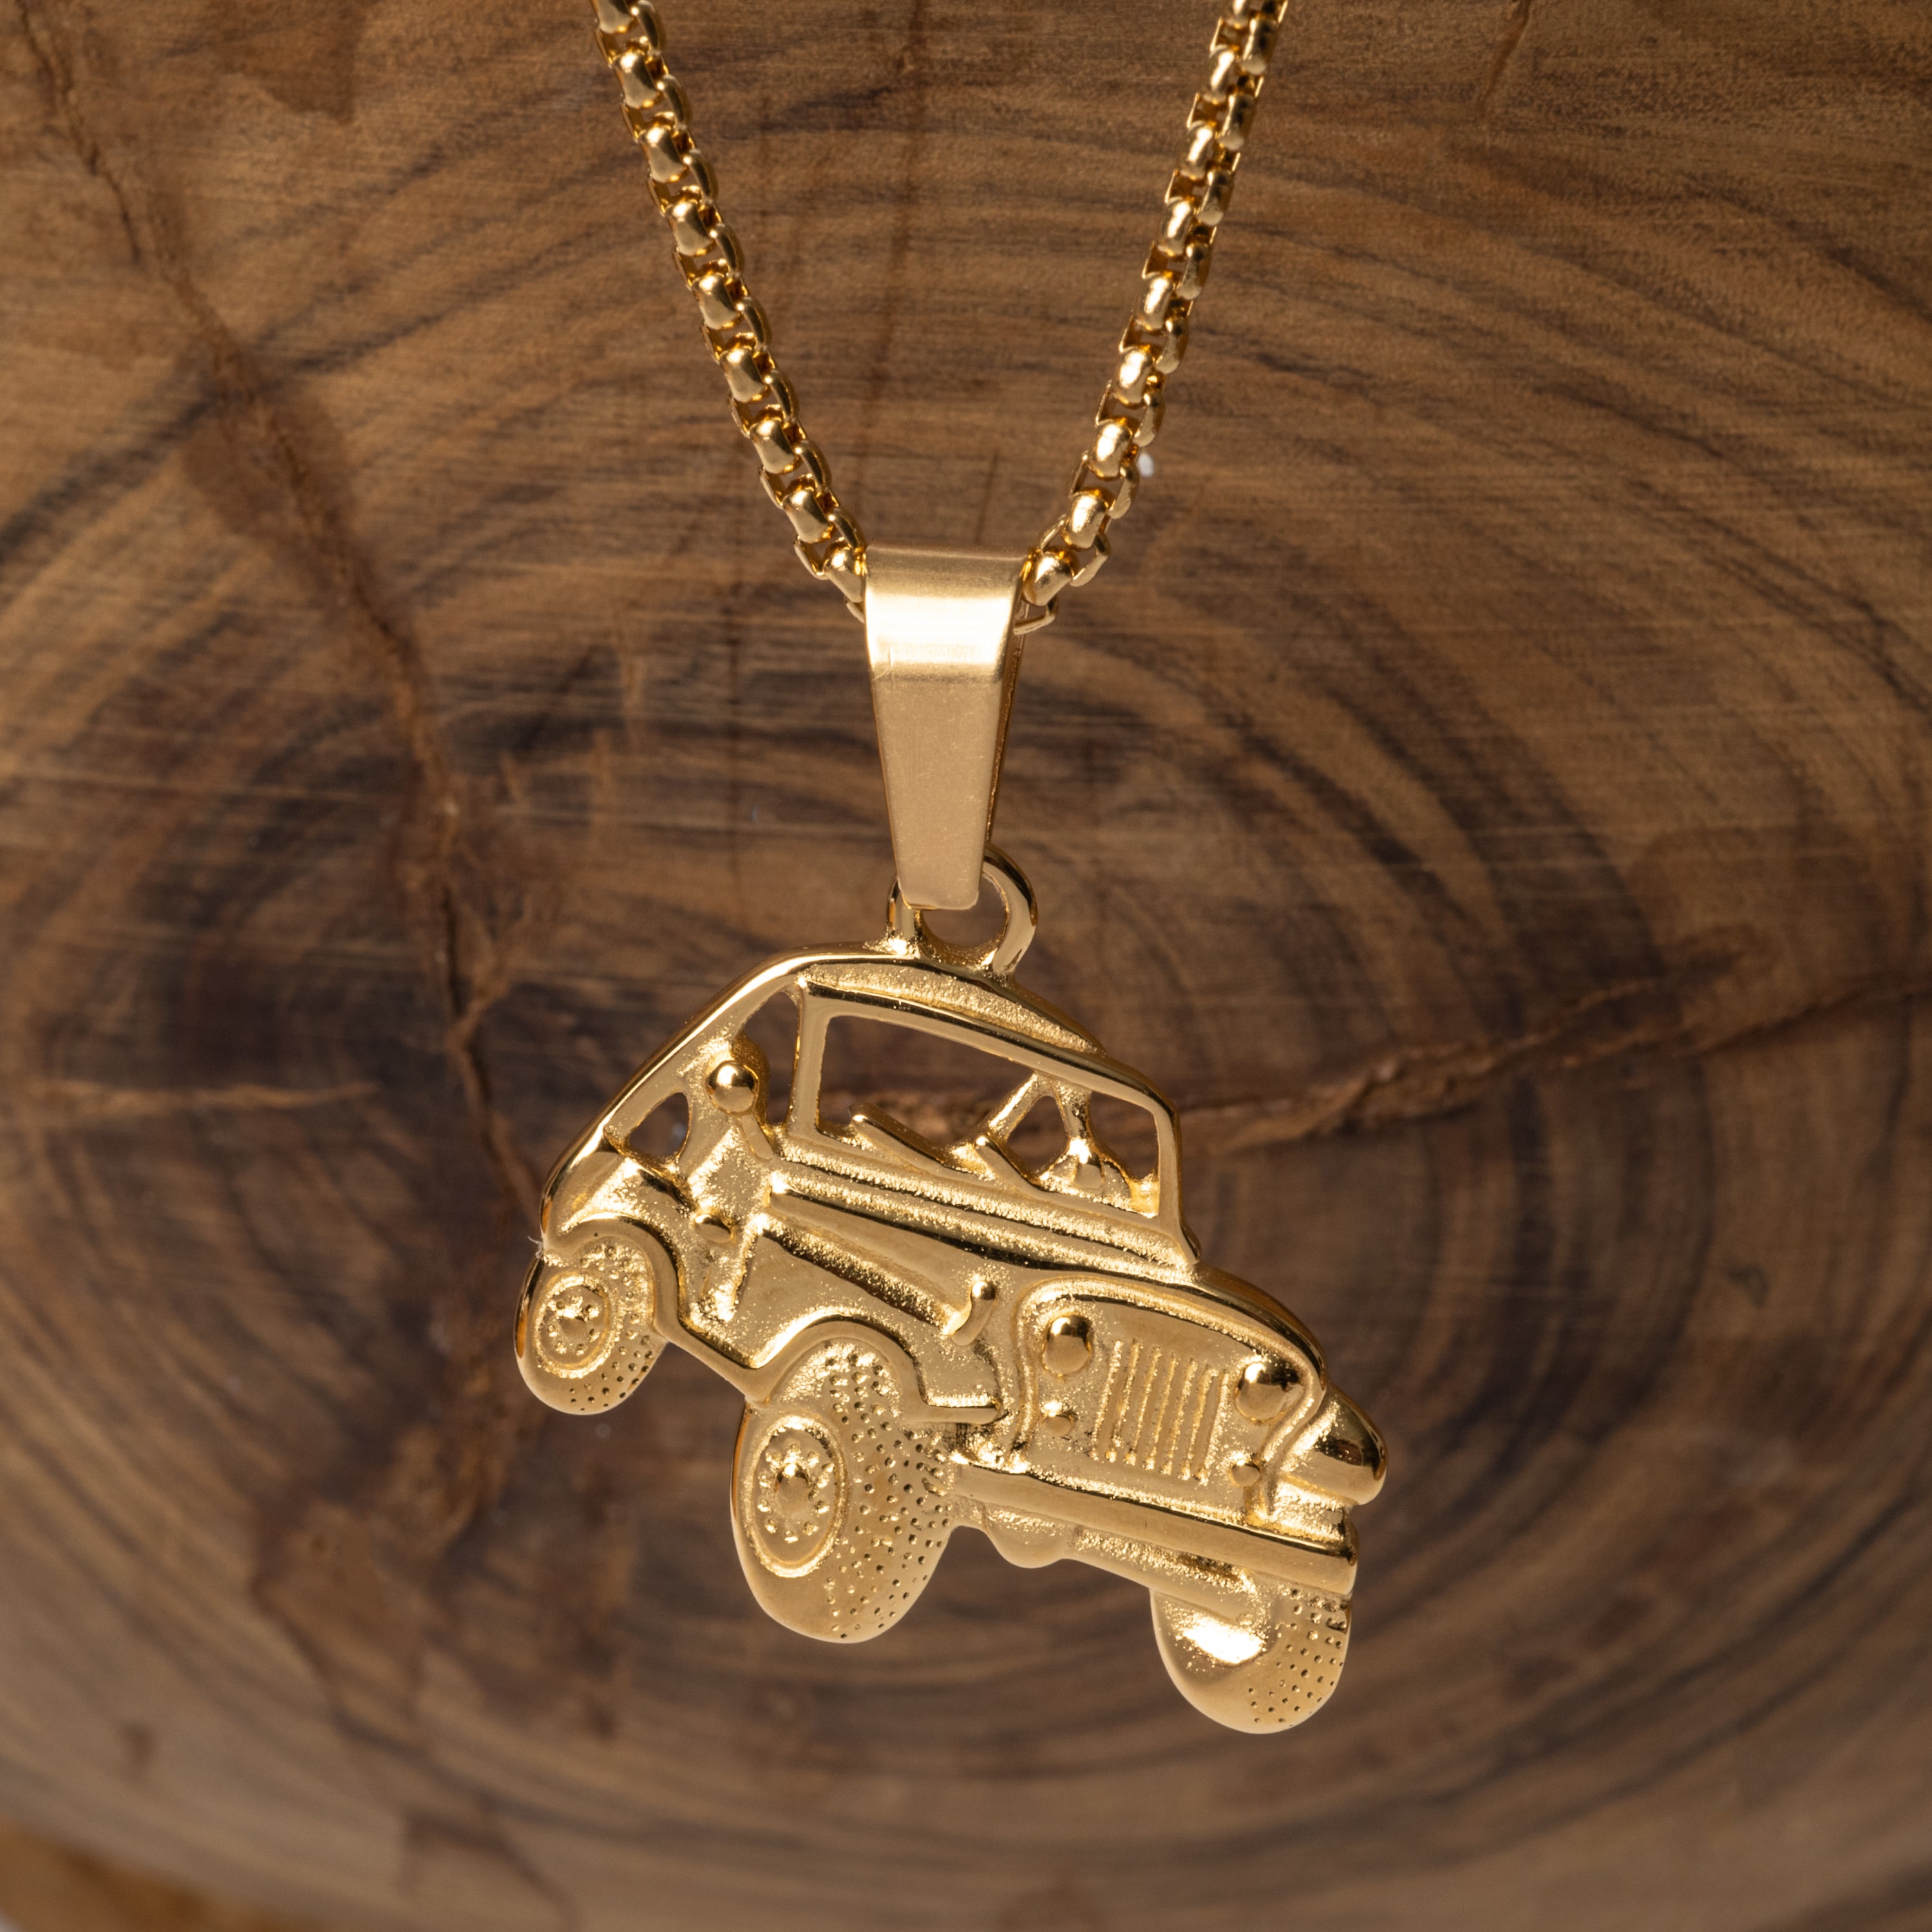 The Off Road Necklace